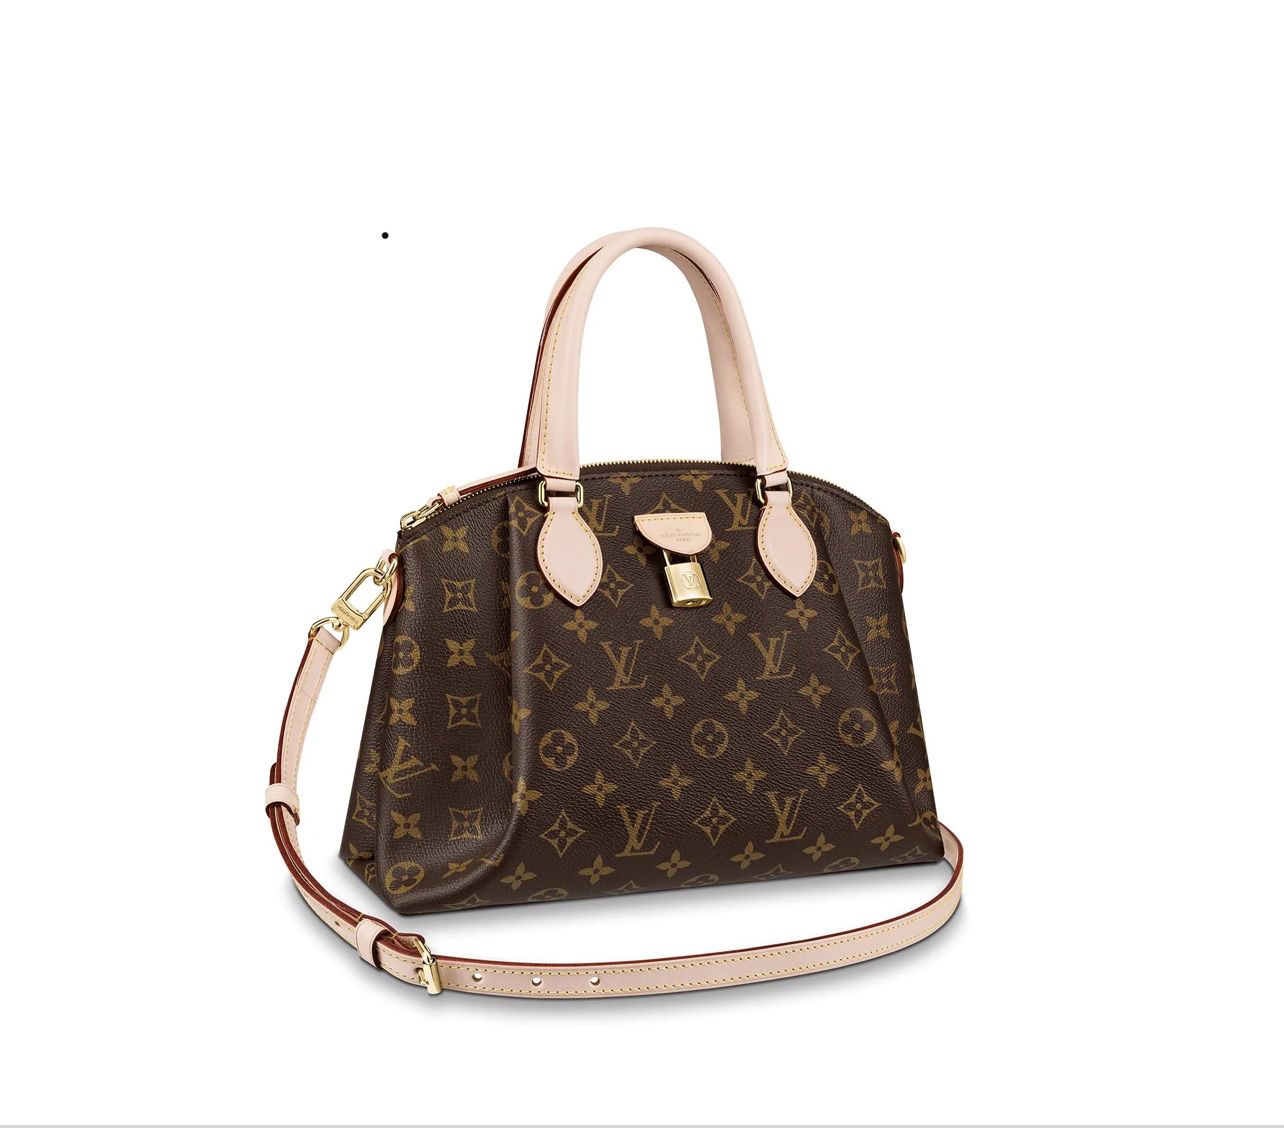 LV Purse $750 for Sale in Rancho Cucamonga, CA - OfferUp